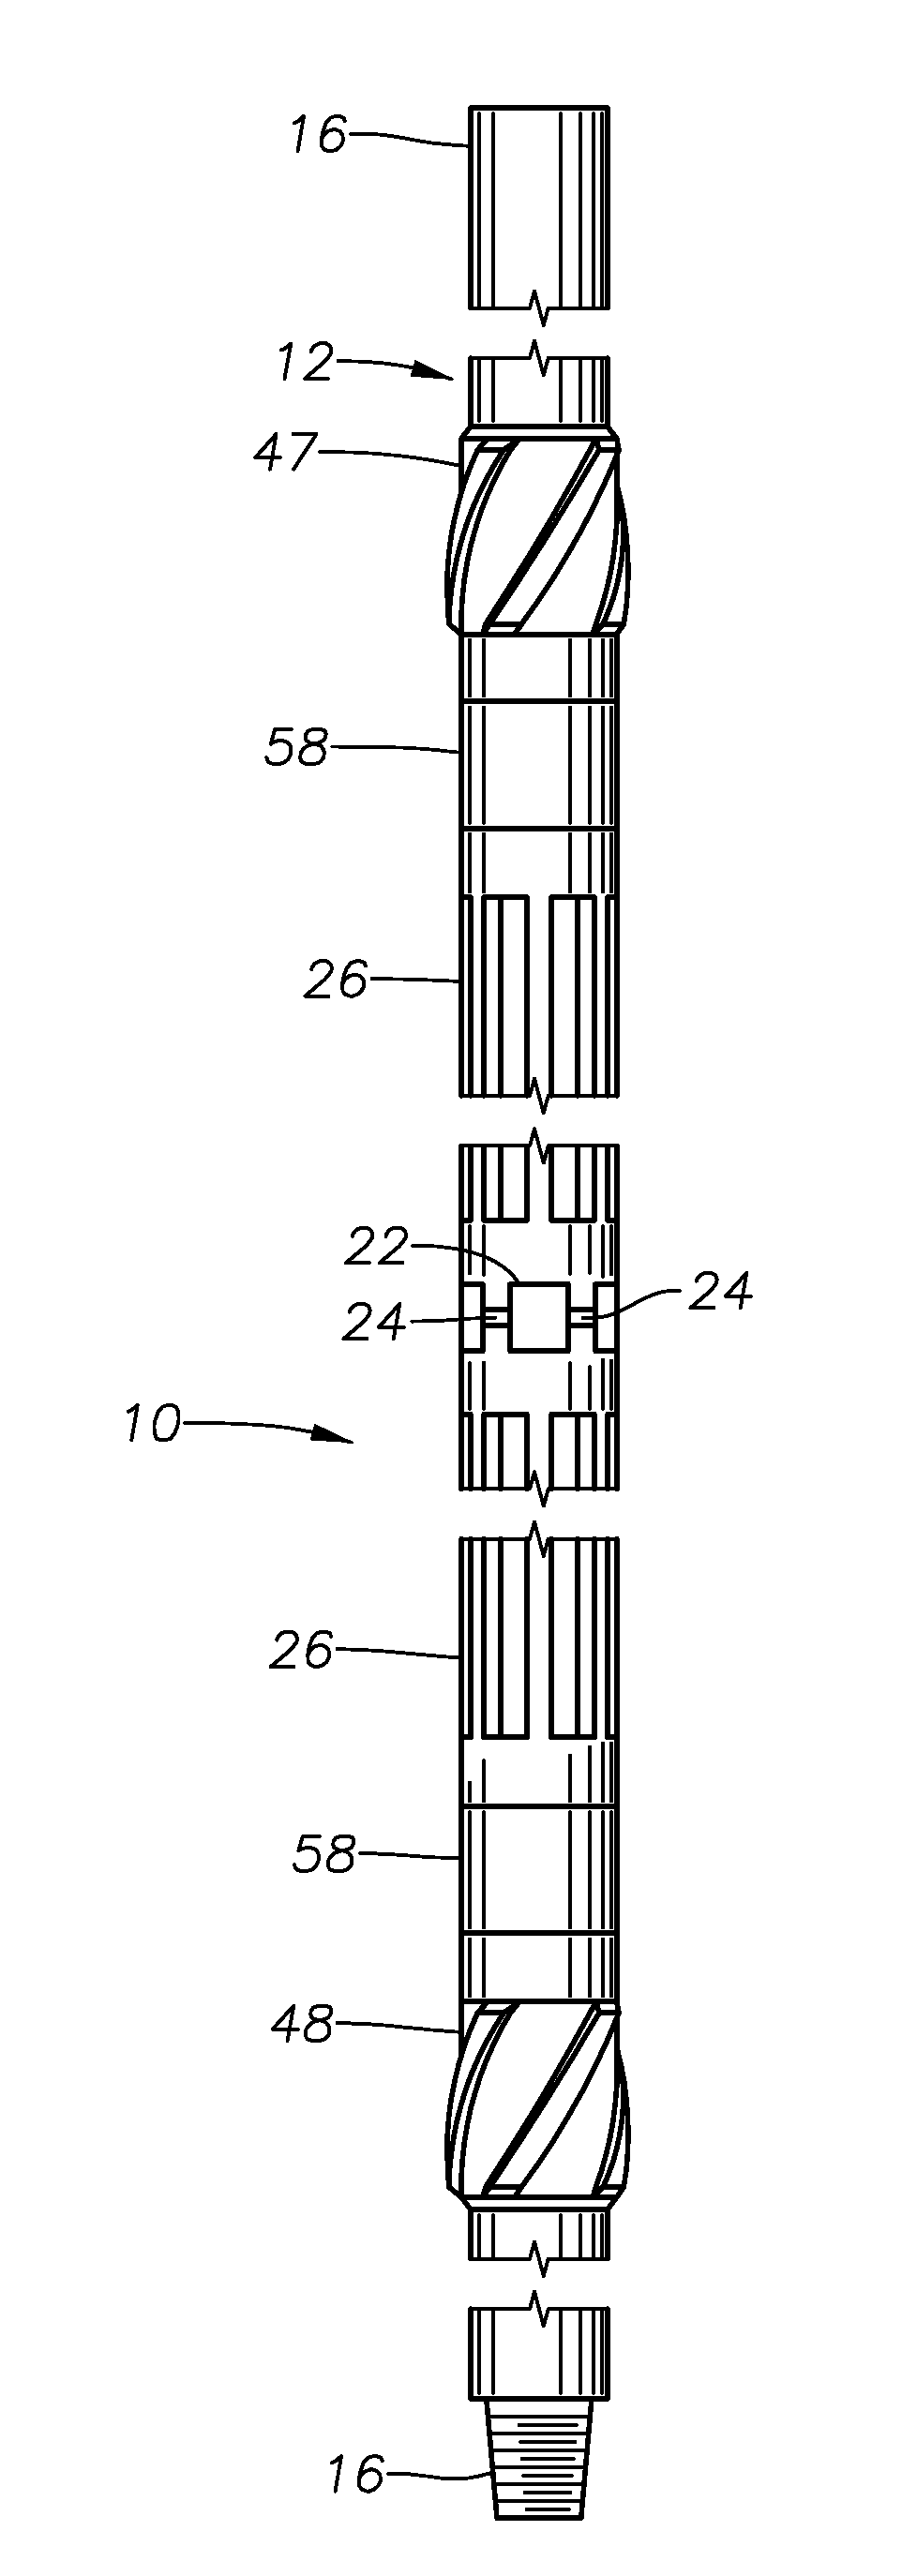 Retaining and Isolating Mechanisms for Magnets in a Magnetic Cleaning Tool